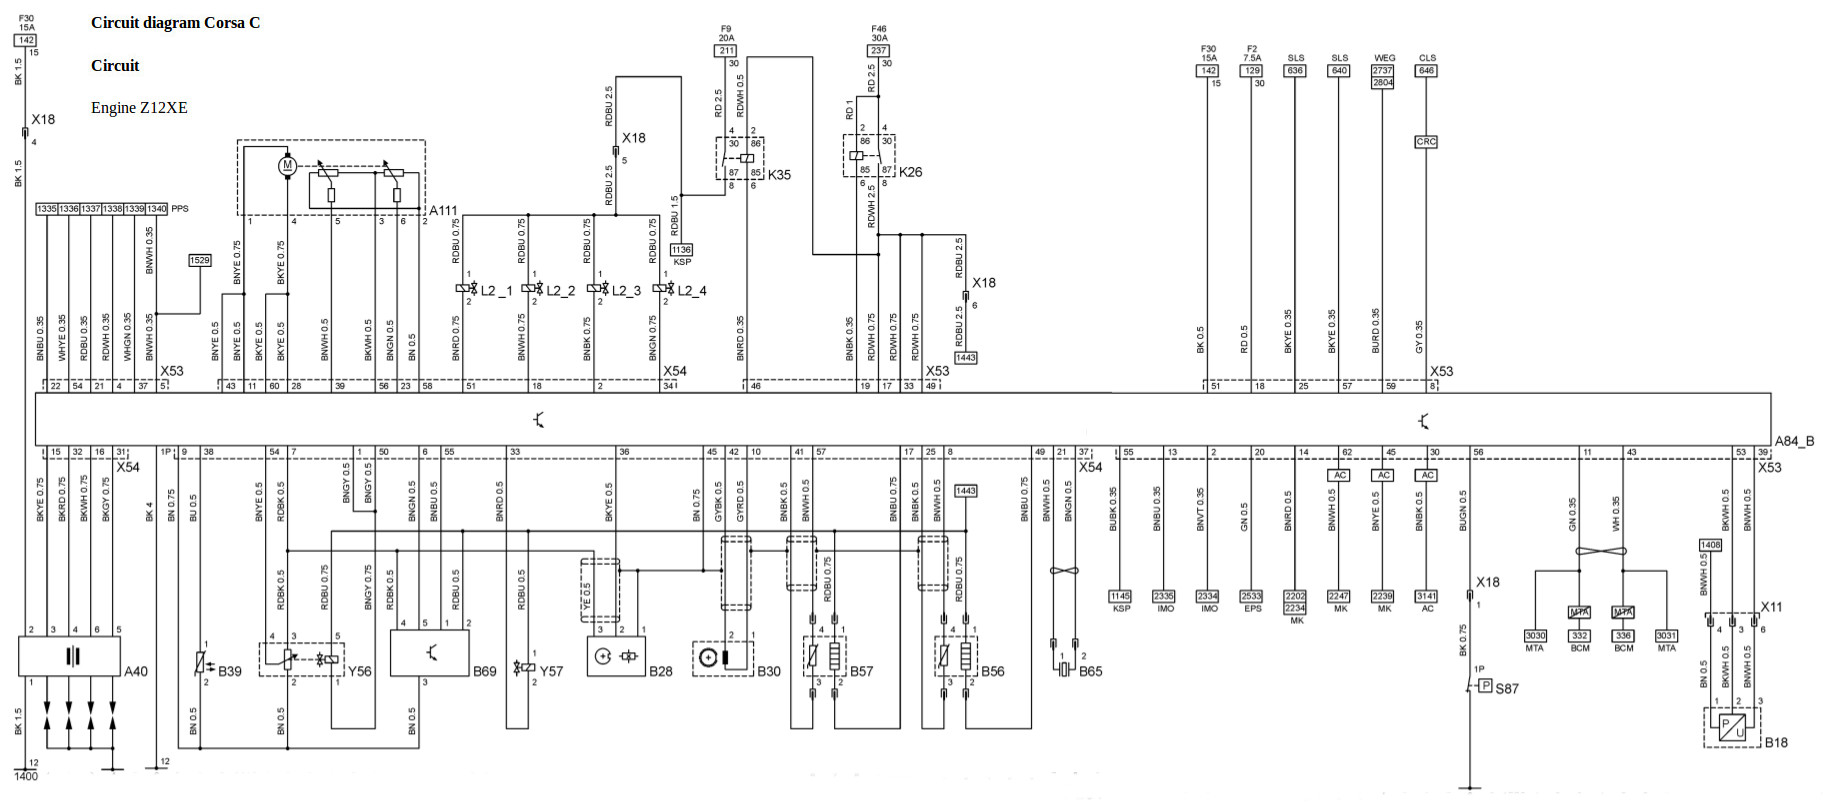 pull Religious why Wiring-diagram-Vauxhall-Corsa-C | Pearltrees